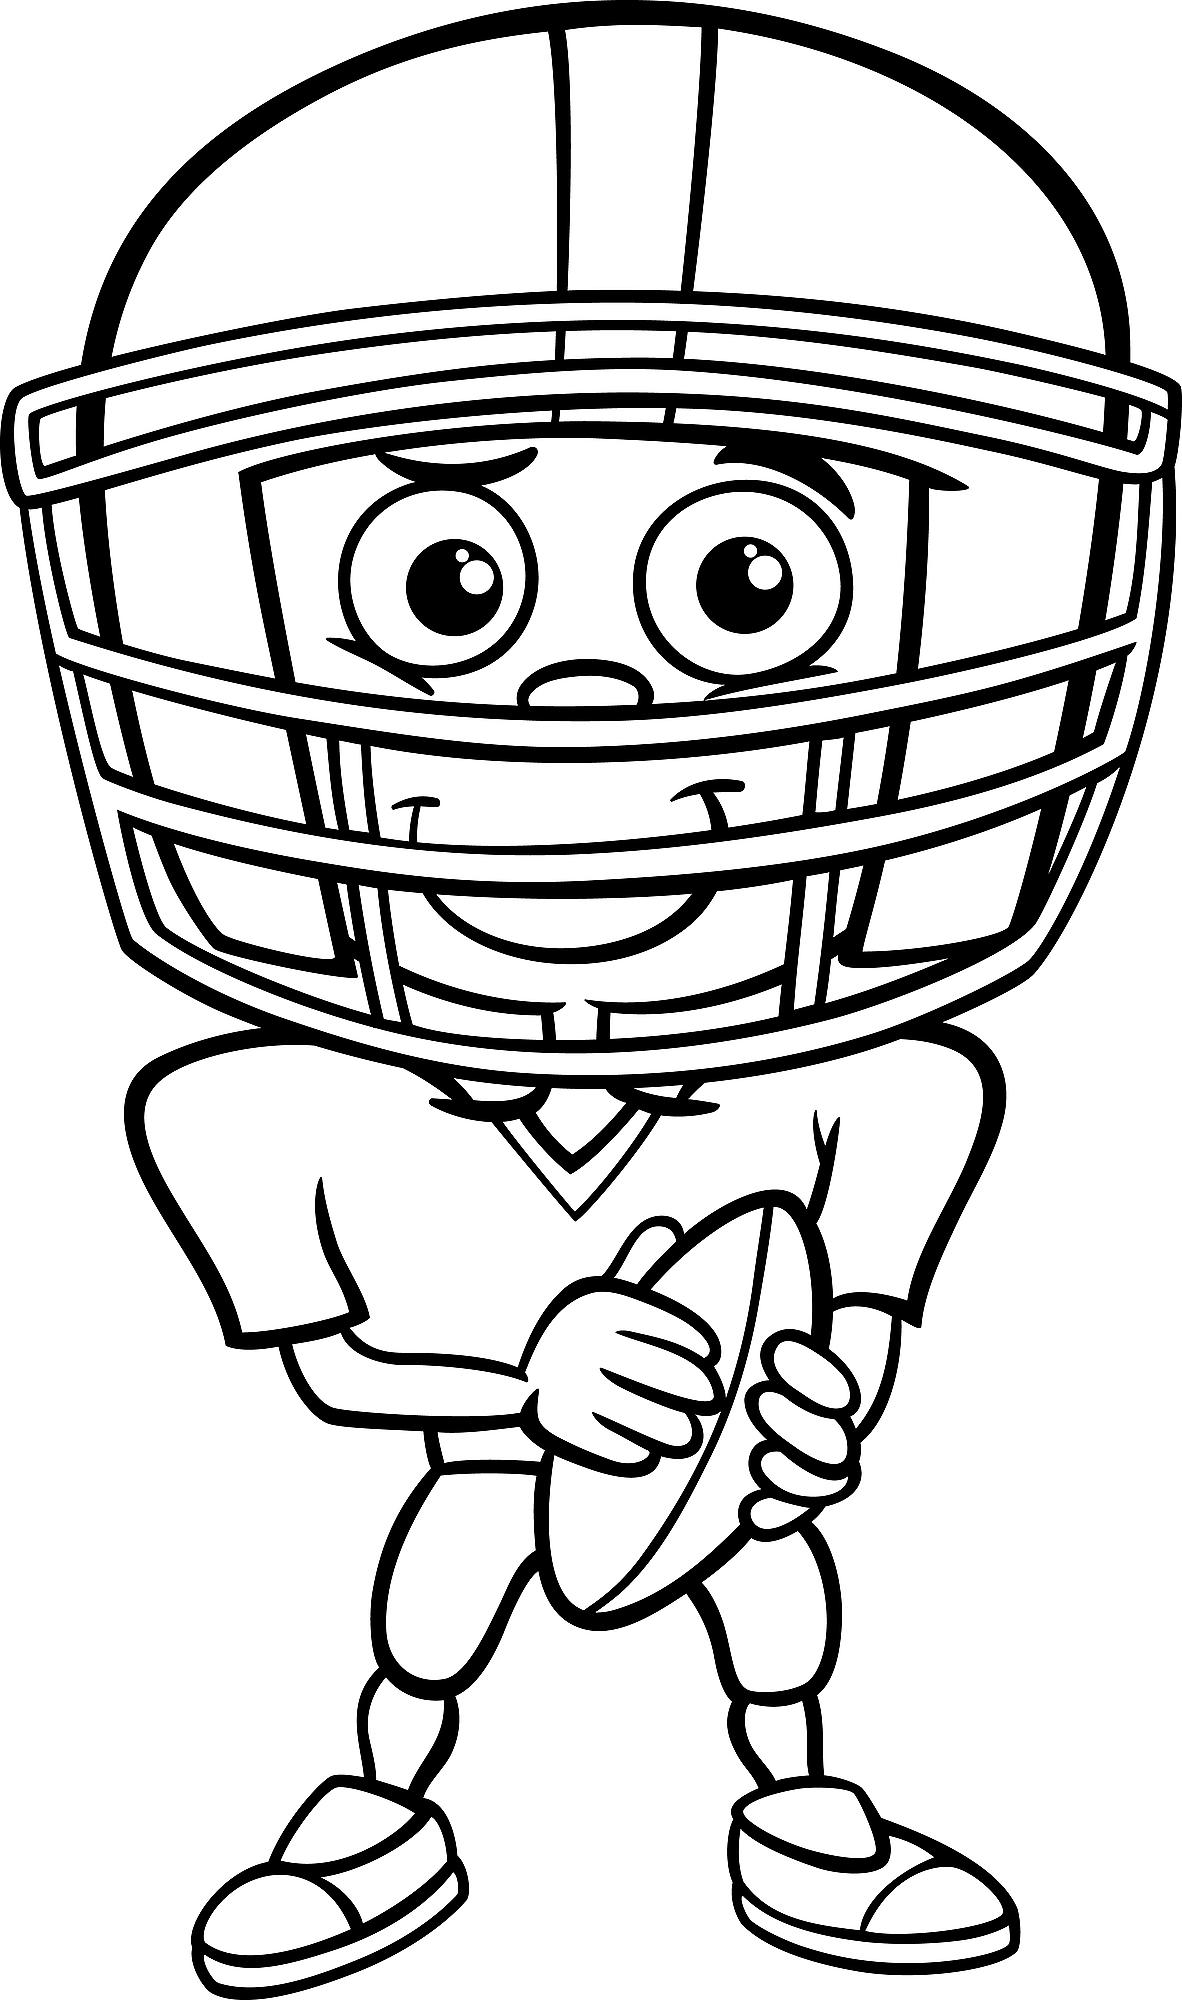 Football Coloring Pages Printable Sports Coloring & Activity ...